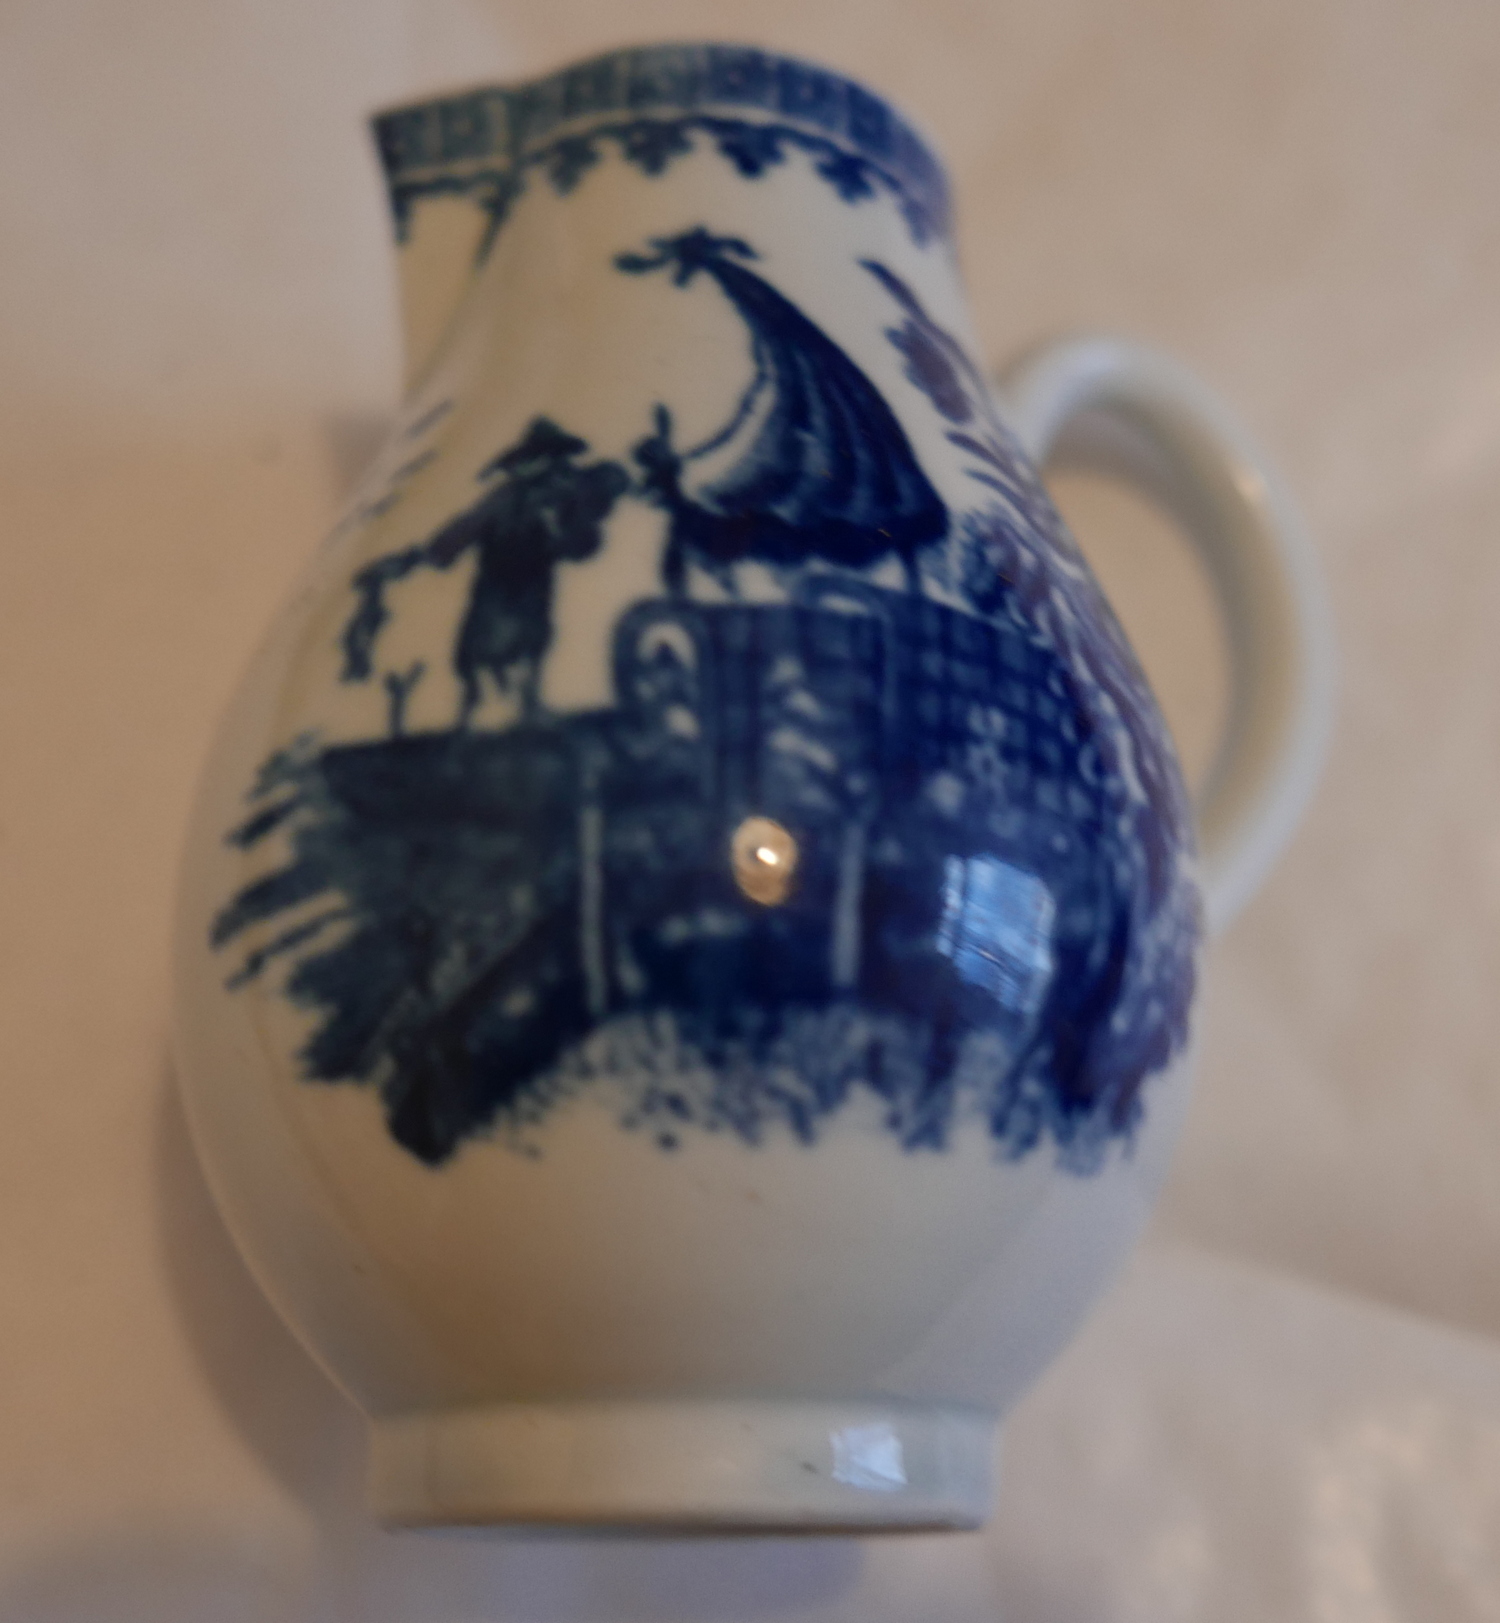 Antique 18th Century English Porcelain Sparrow Beak Jug 3 1/2" tall - excellent cond. - Image 2 of 7